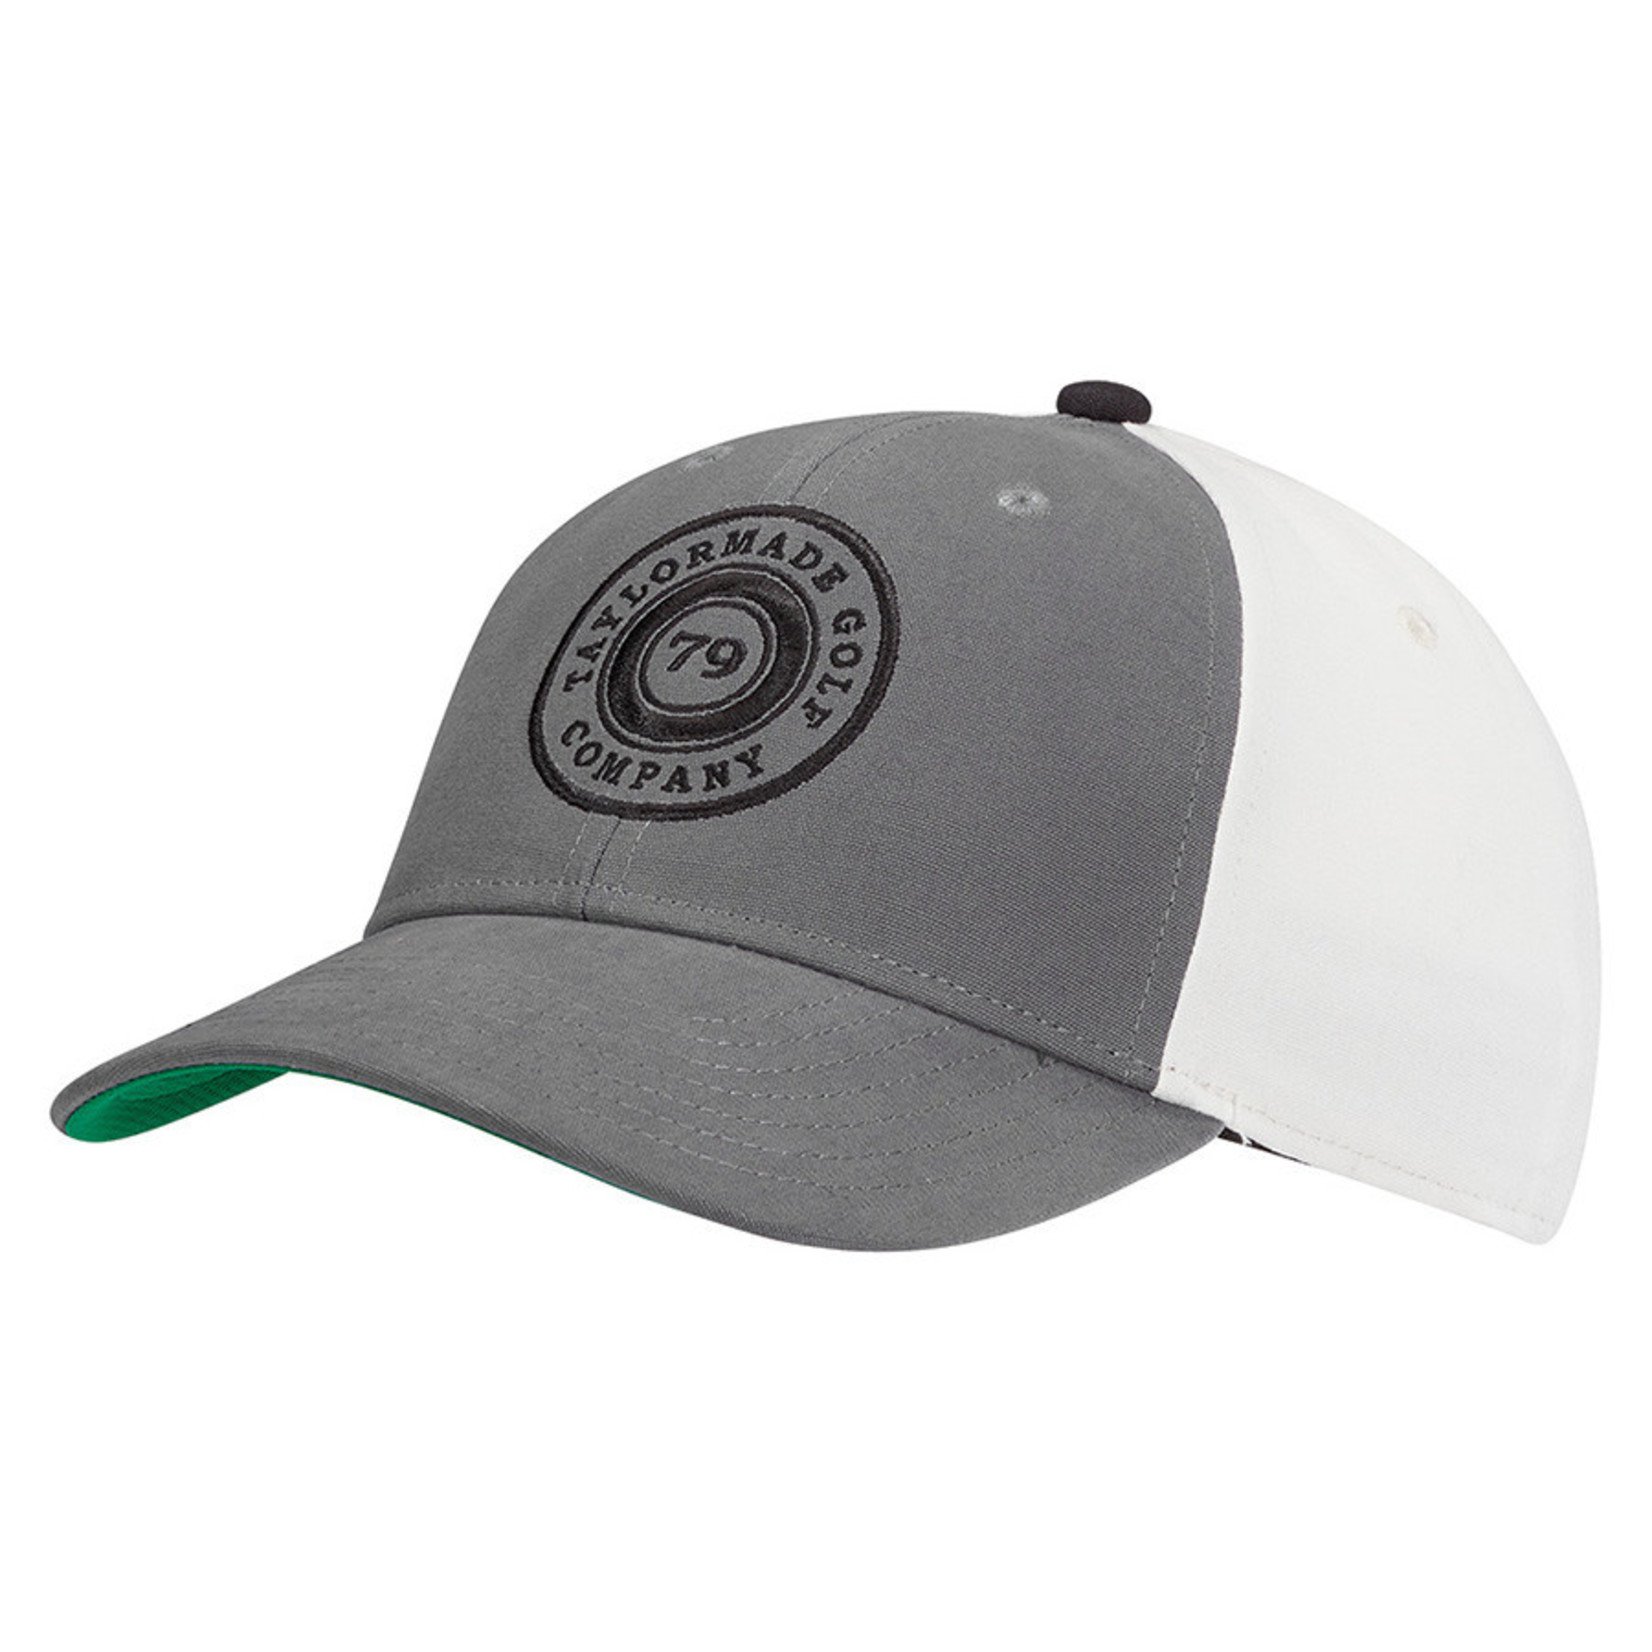 TaylorMade Low Crown Snapback Hat